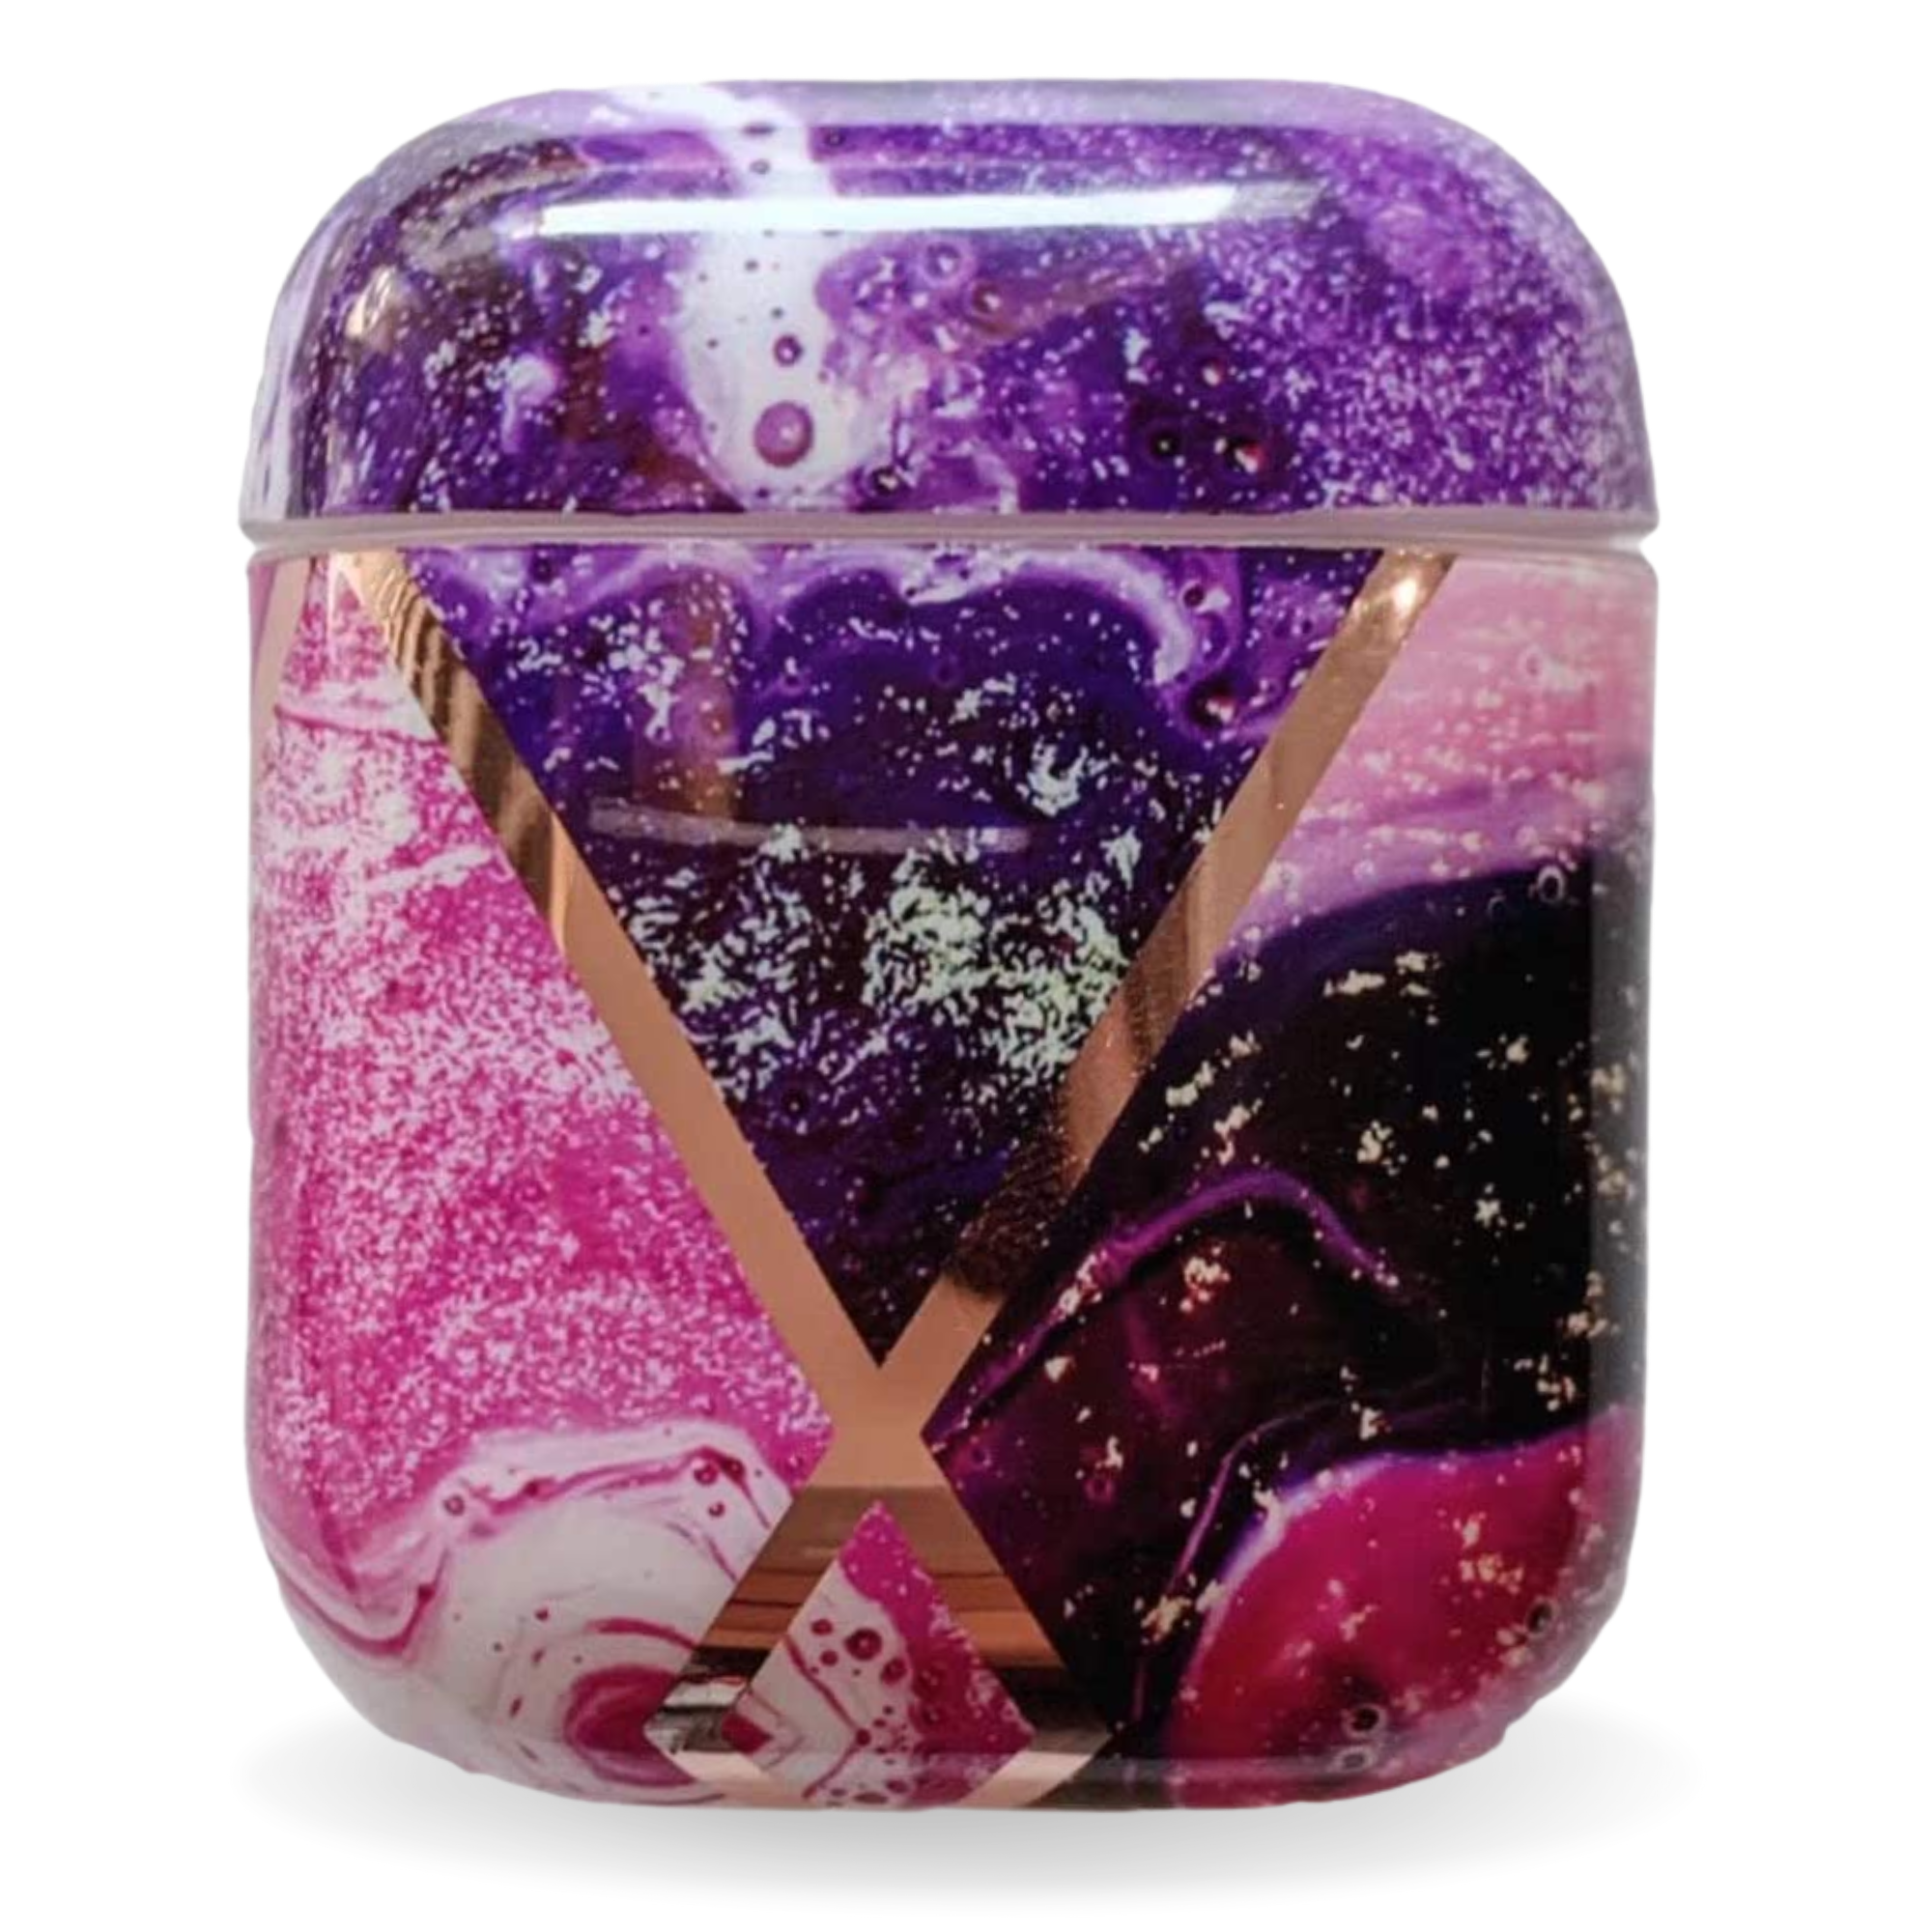 Airpod Case For Apple Airpods Gen 1 & 2 - Cute Geometric Art Marble Design Protective Silicone Cover With Keychain Slot- Supports Wireless Qi Charging For Airpods Generation 1 2 - Purple Dream Marble